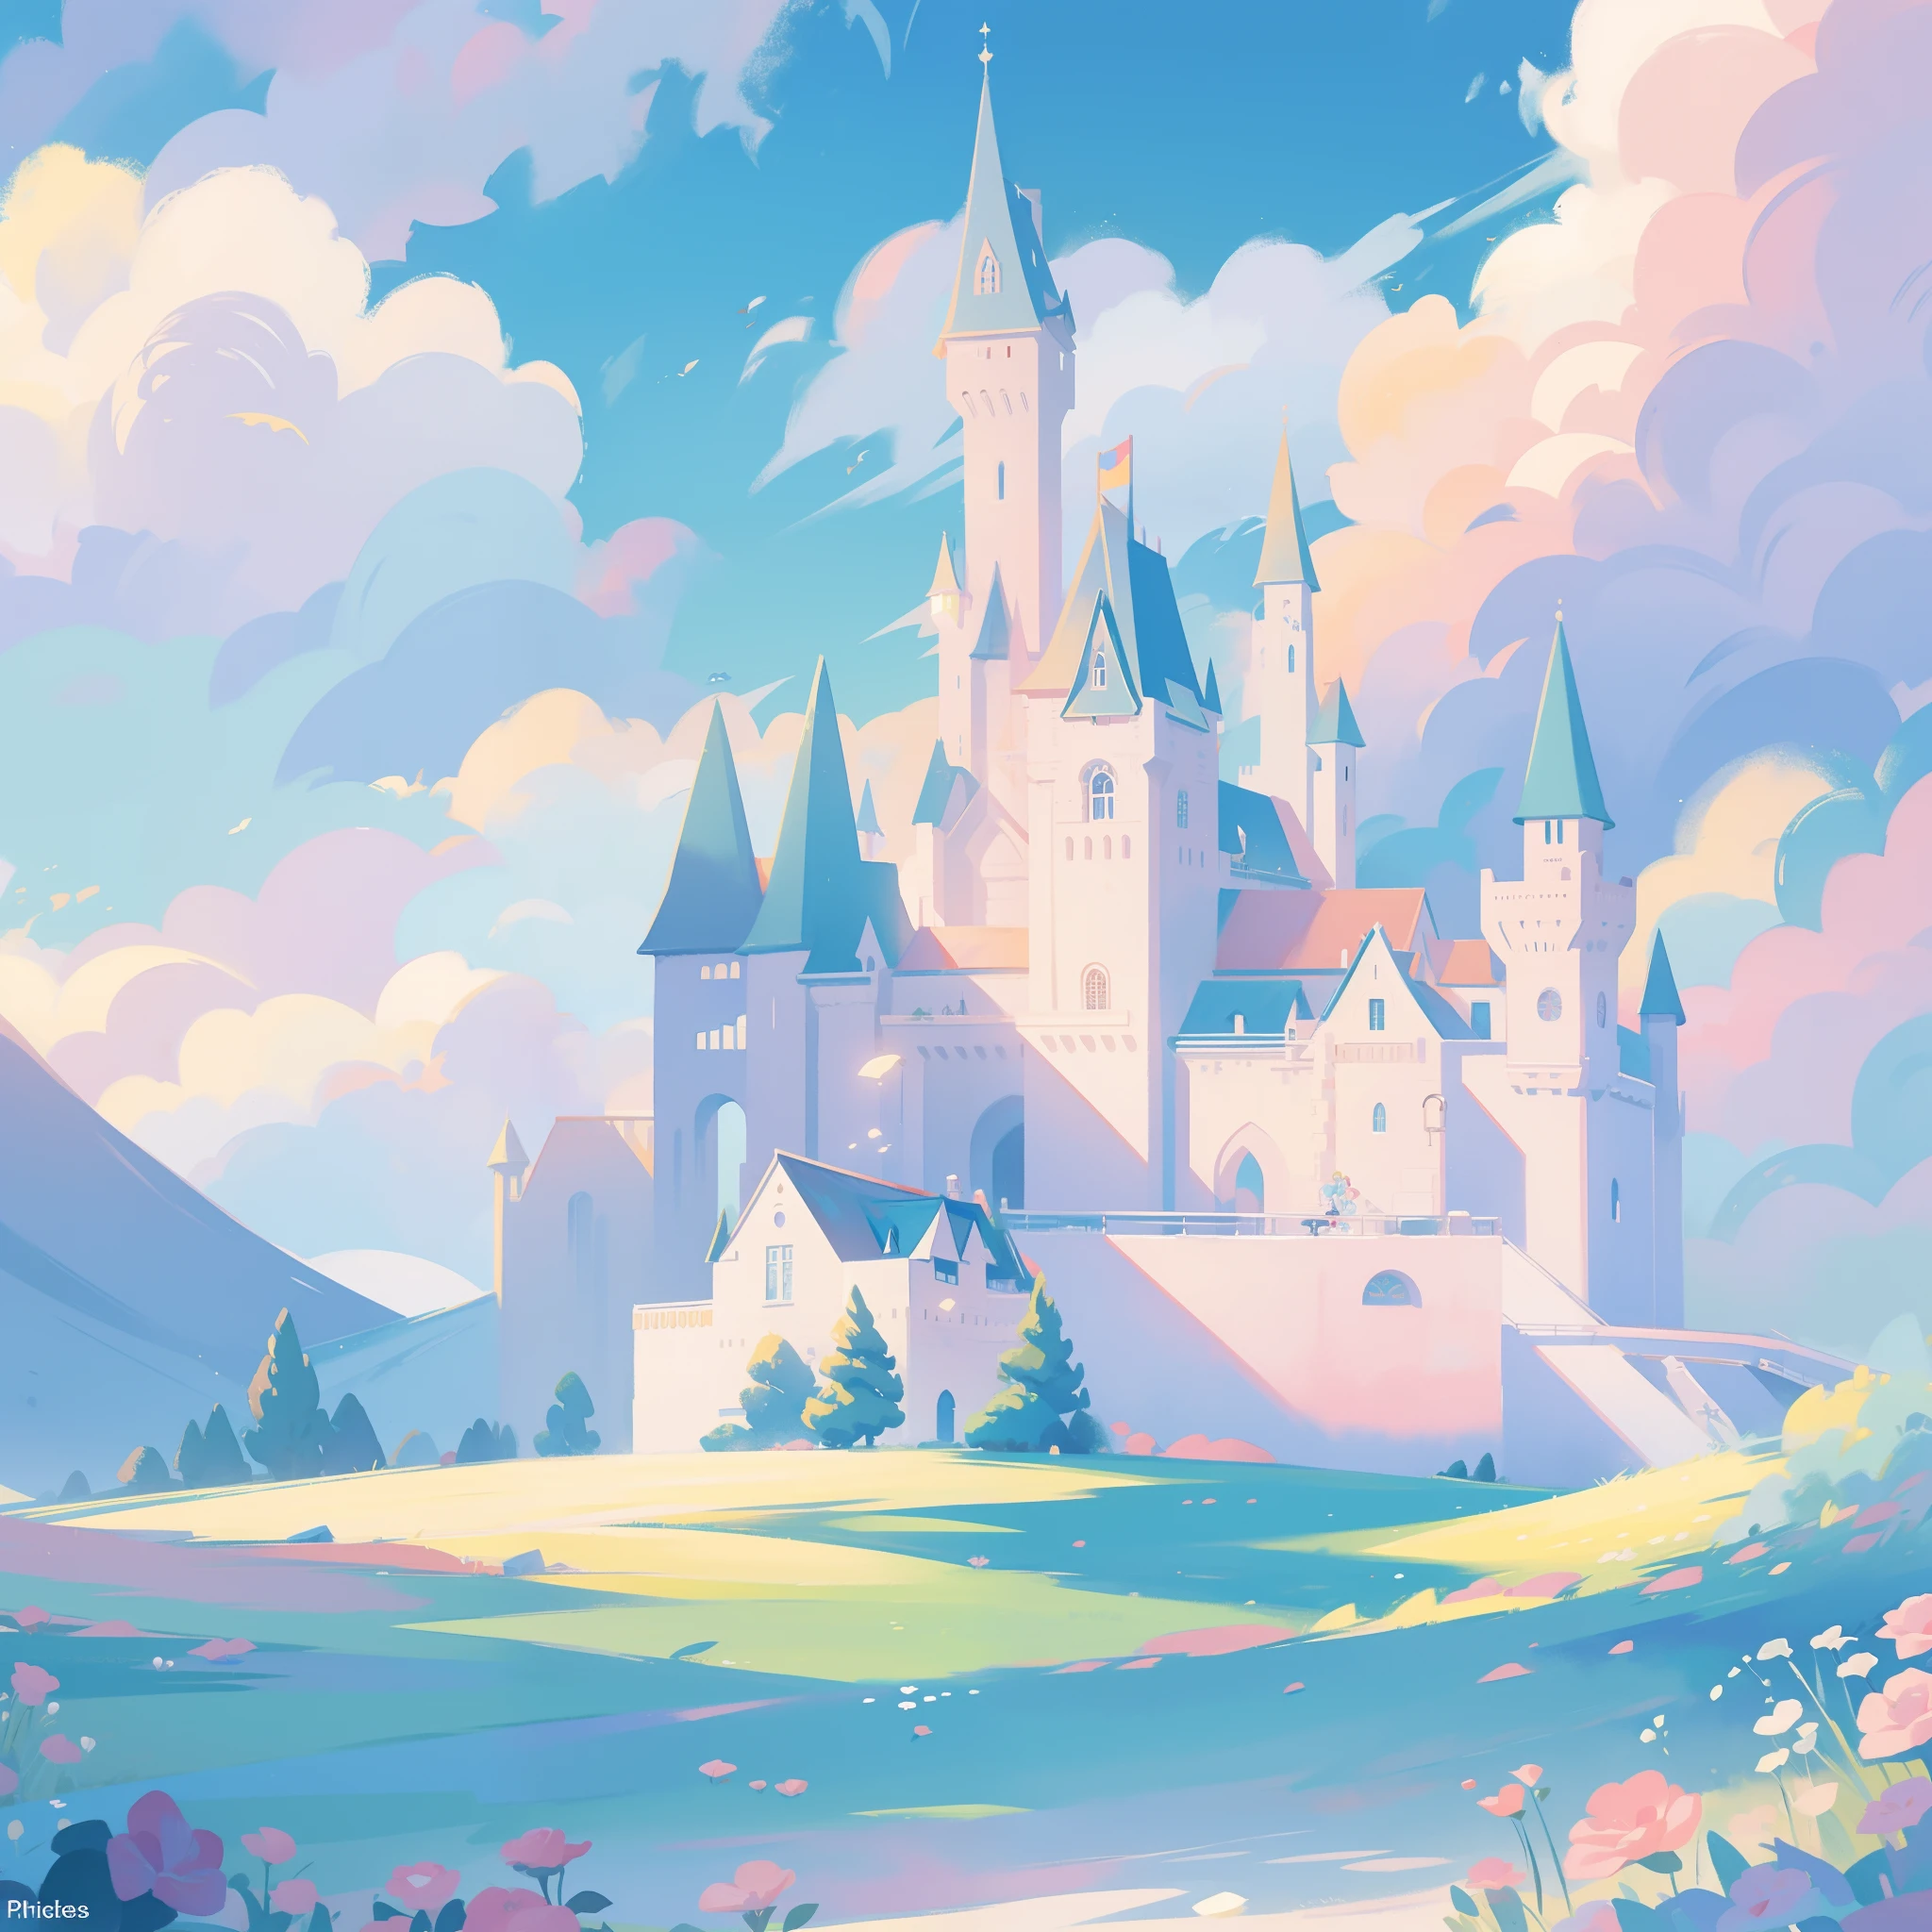 picture book illustration, watercolor storybook illustration, princess castle, fairytale castle, fairytale towers, clouds, vibrant pastel colors, dream, colorful, whimsical, magical, masterpiece, best quality, sharp focus, intricately detailed environment, fine detail, 8k resolution